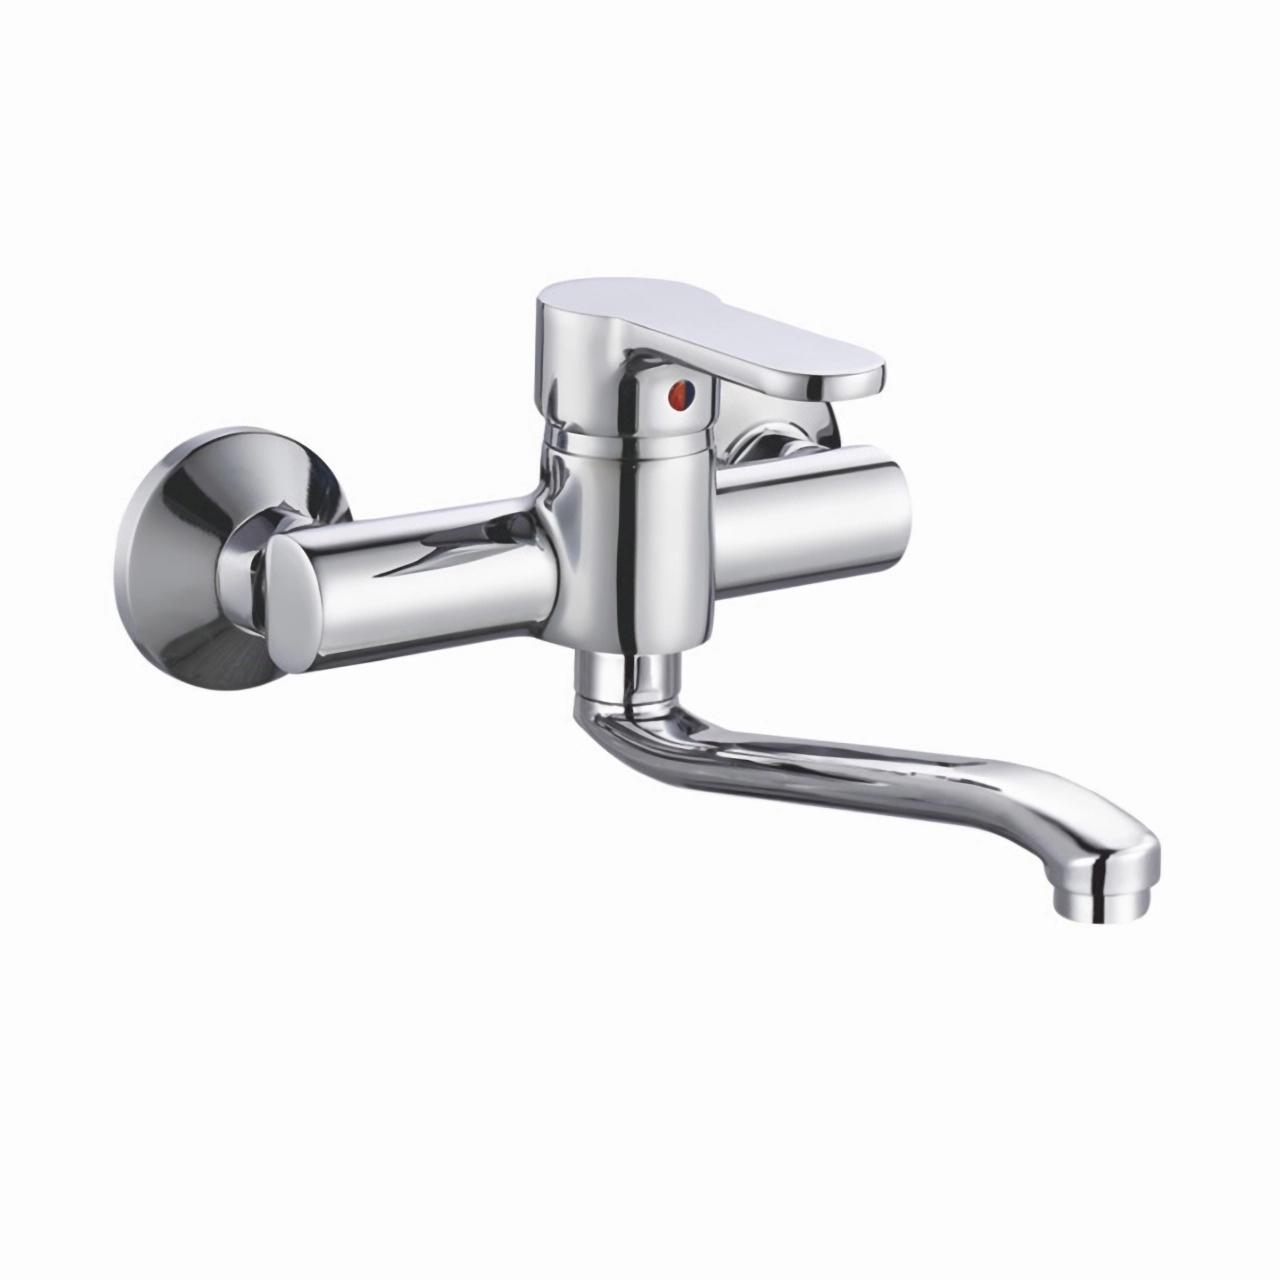 OJ-J2206H Control Valve Switch Tub Tap Chrome Plated Wall Mount Shower Cold and Hot Water Mixer Faucet Zinc Alloy Shower Faucet